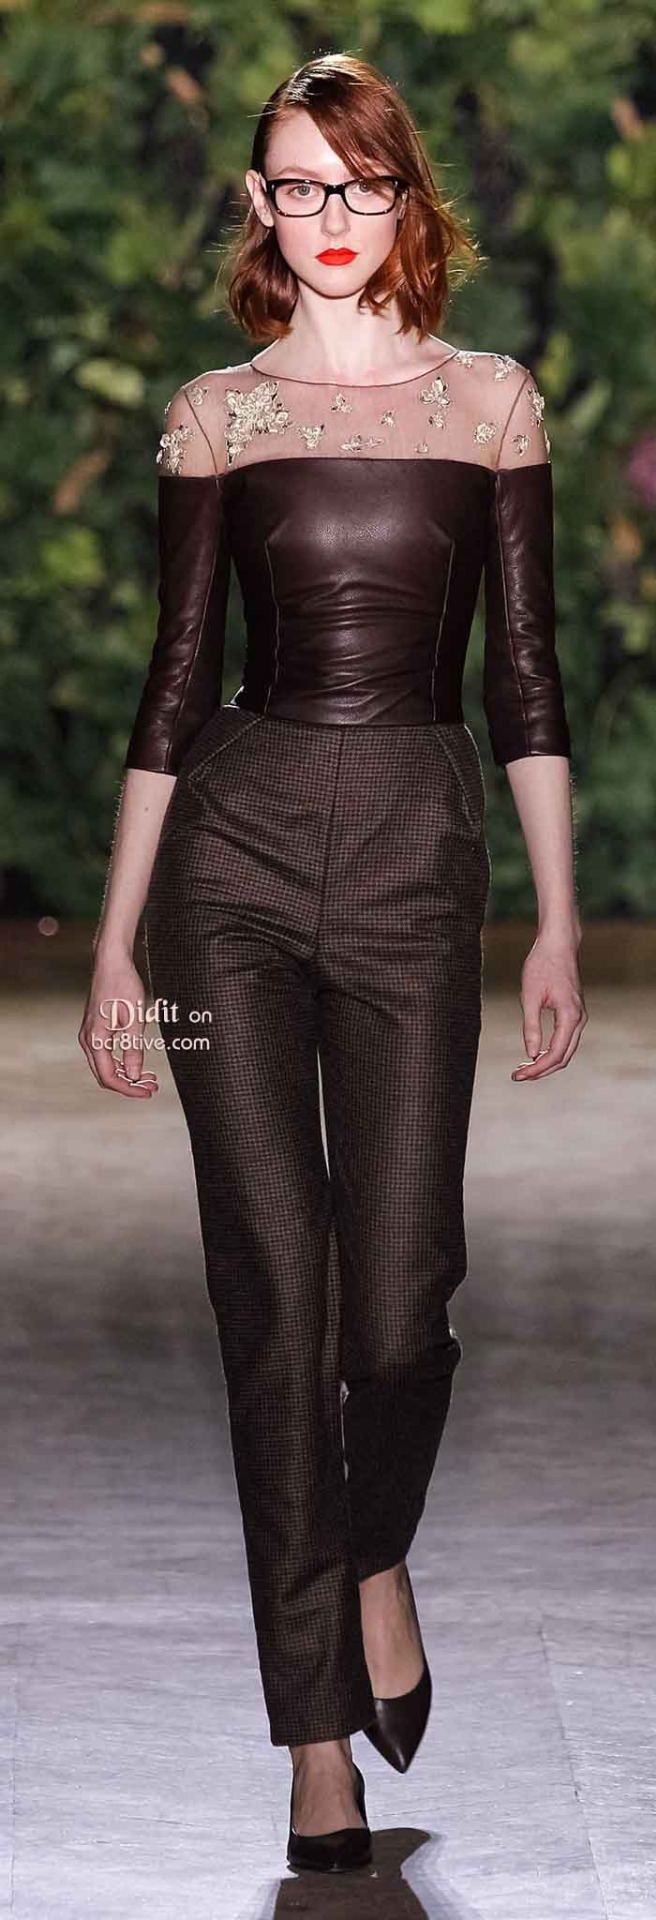 Seamed leather top with mesh